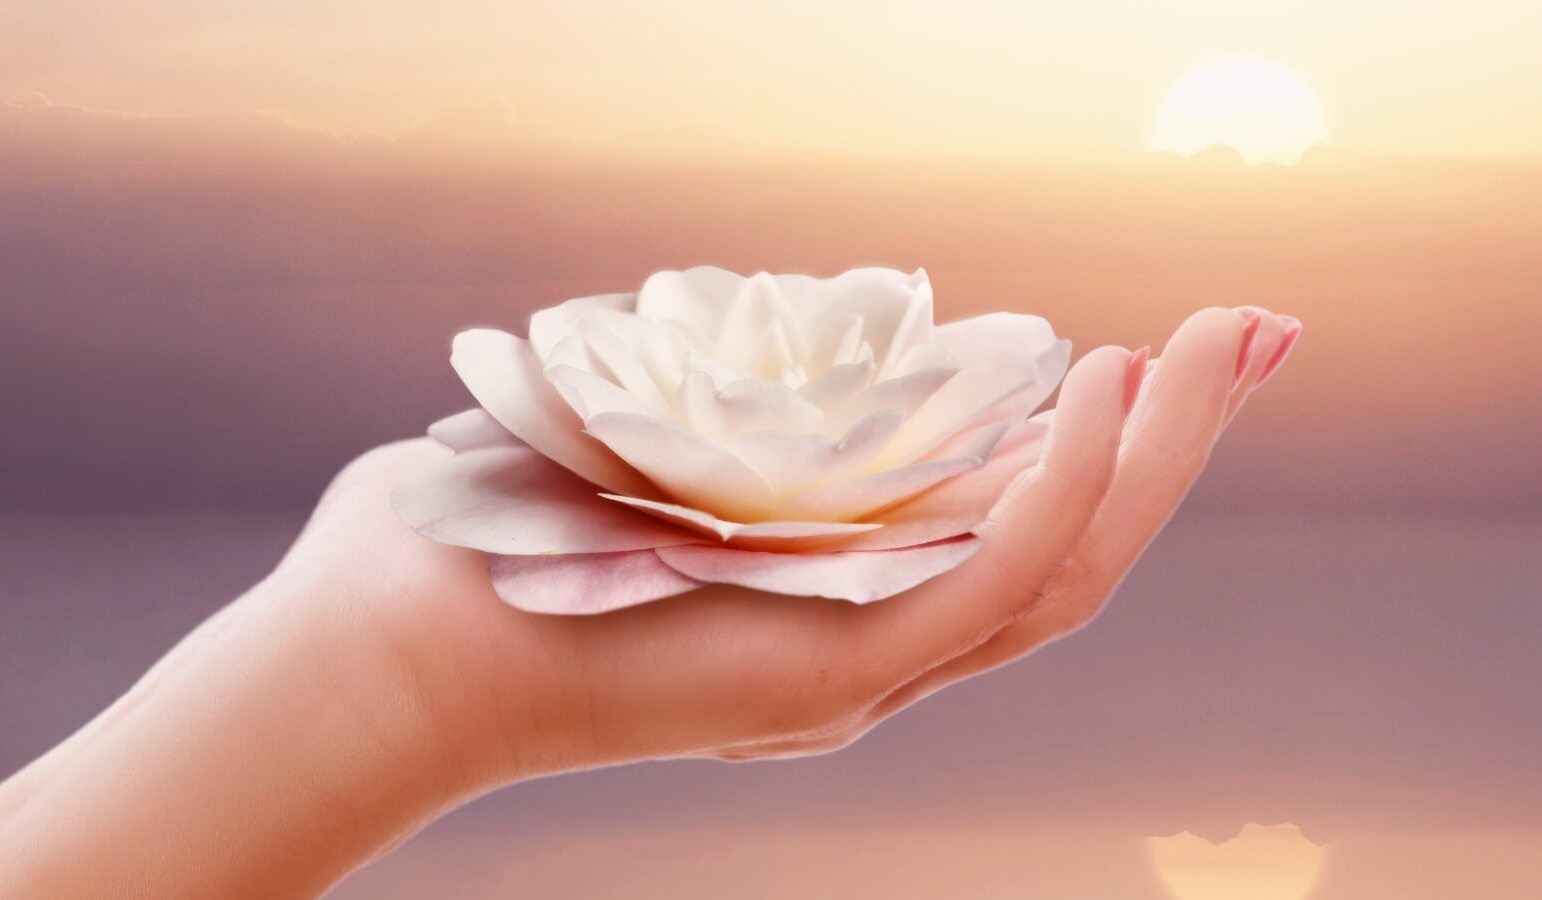 A hand holding a blossomed flower against the backdrop of a sunset